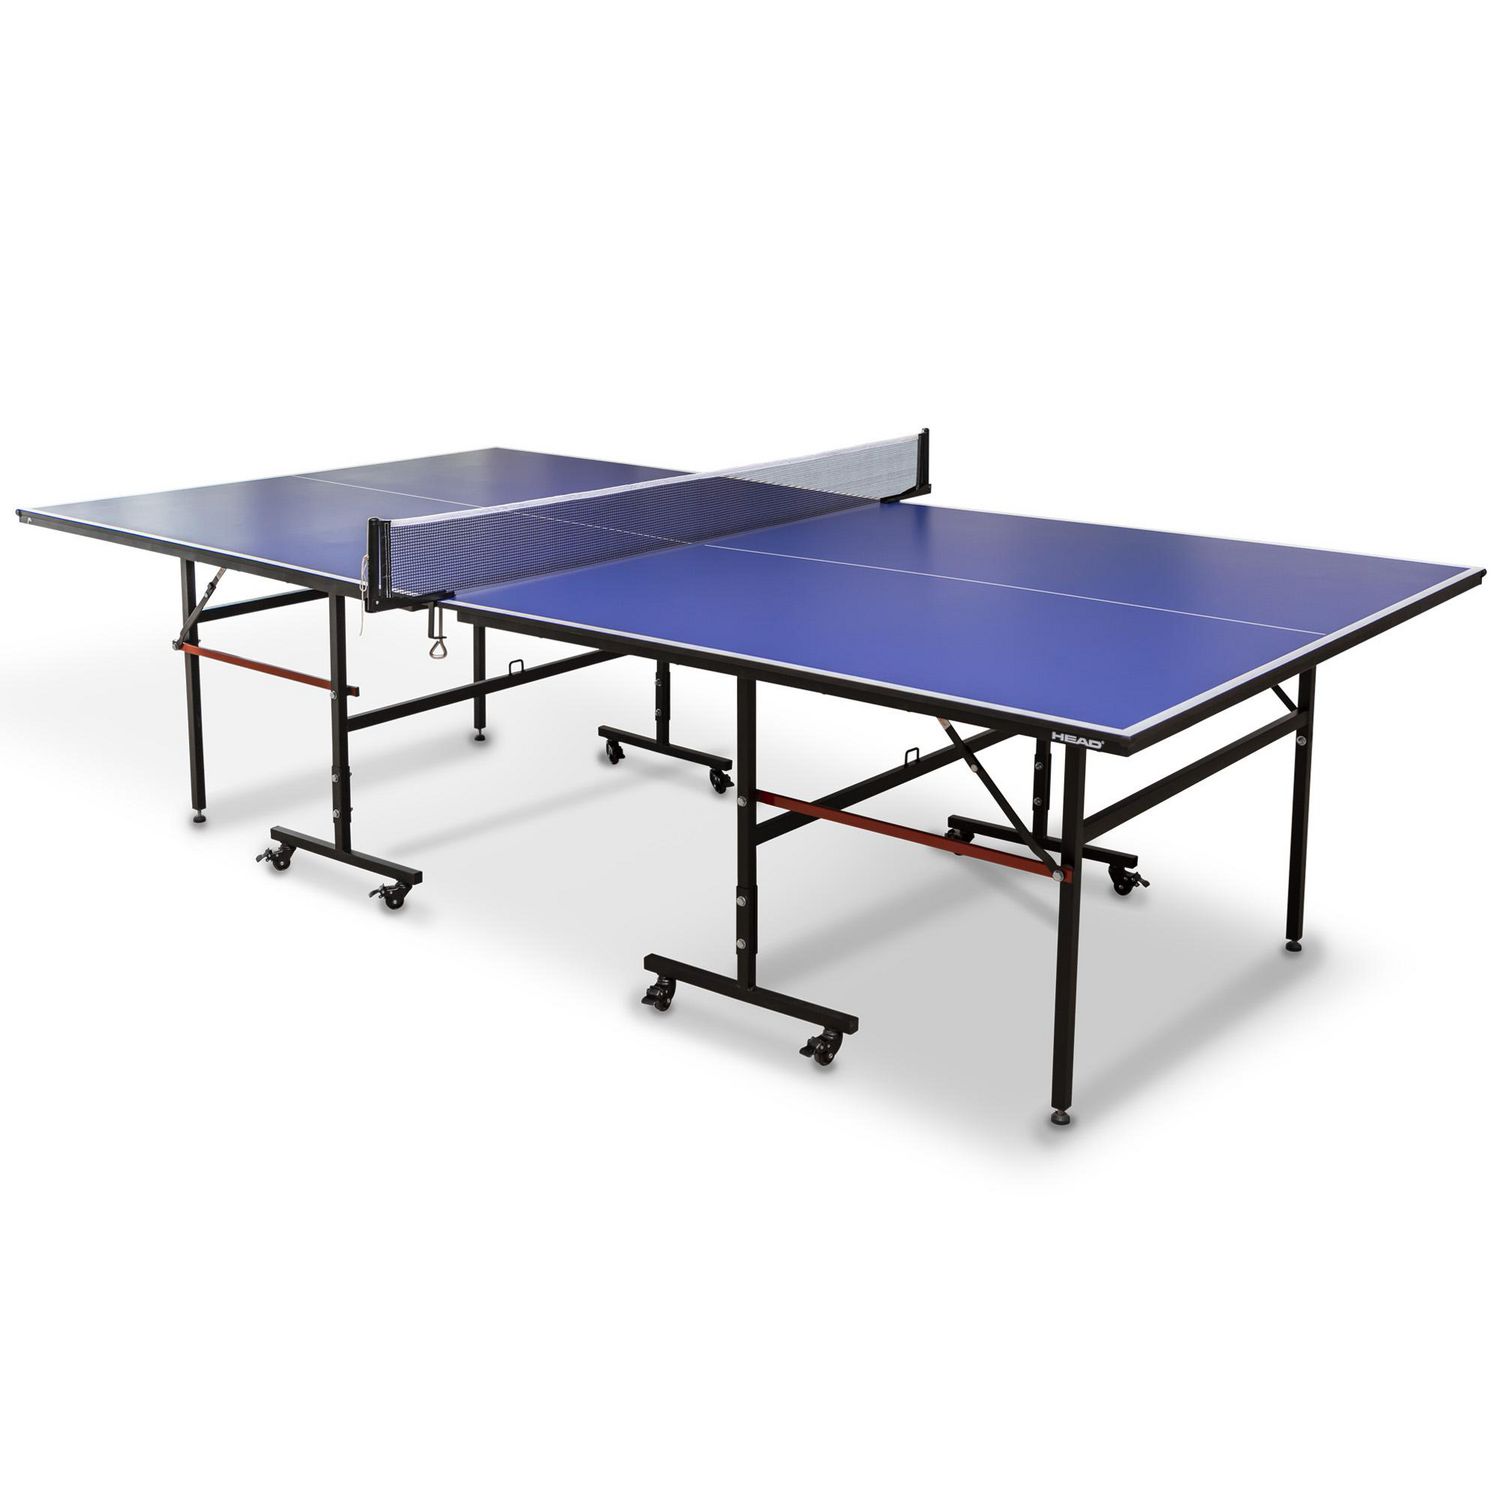 HEAD Apex Table Tennis Table/Ping Pong Table, 25-mm